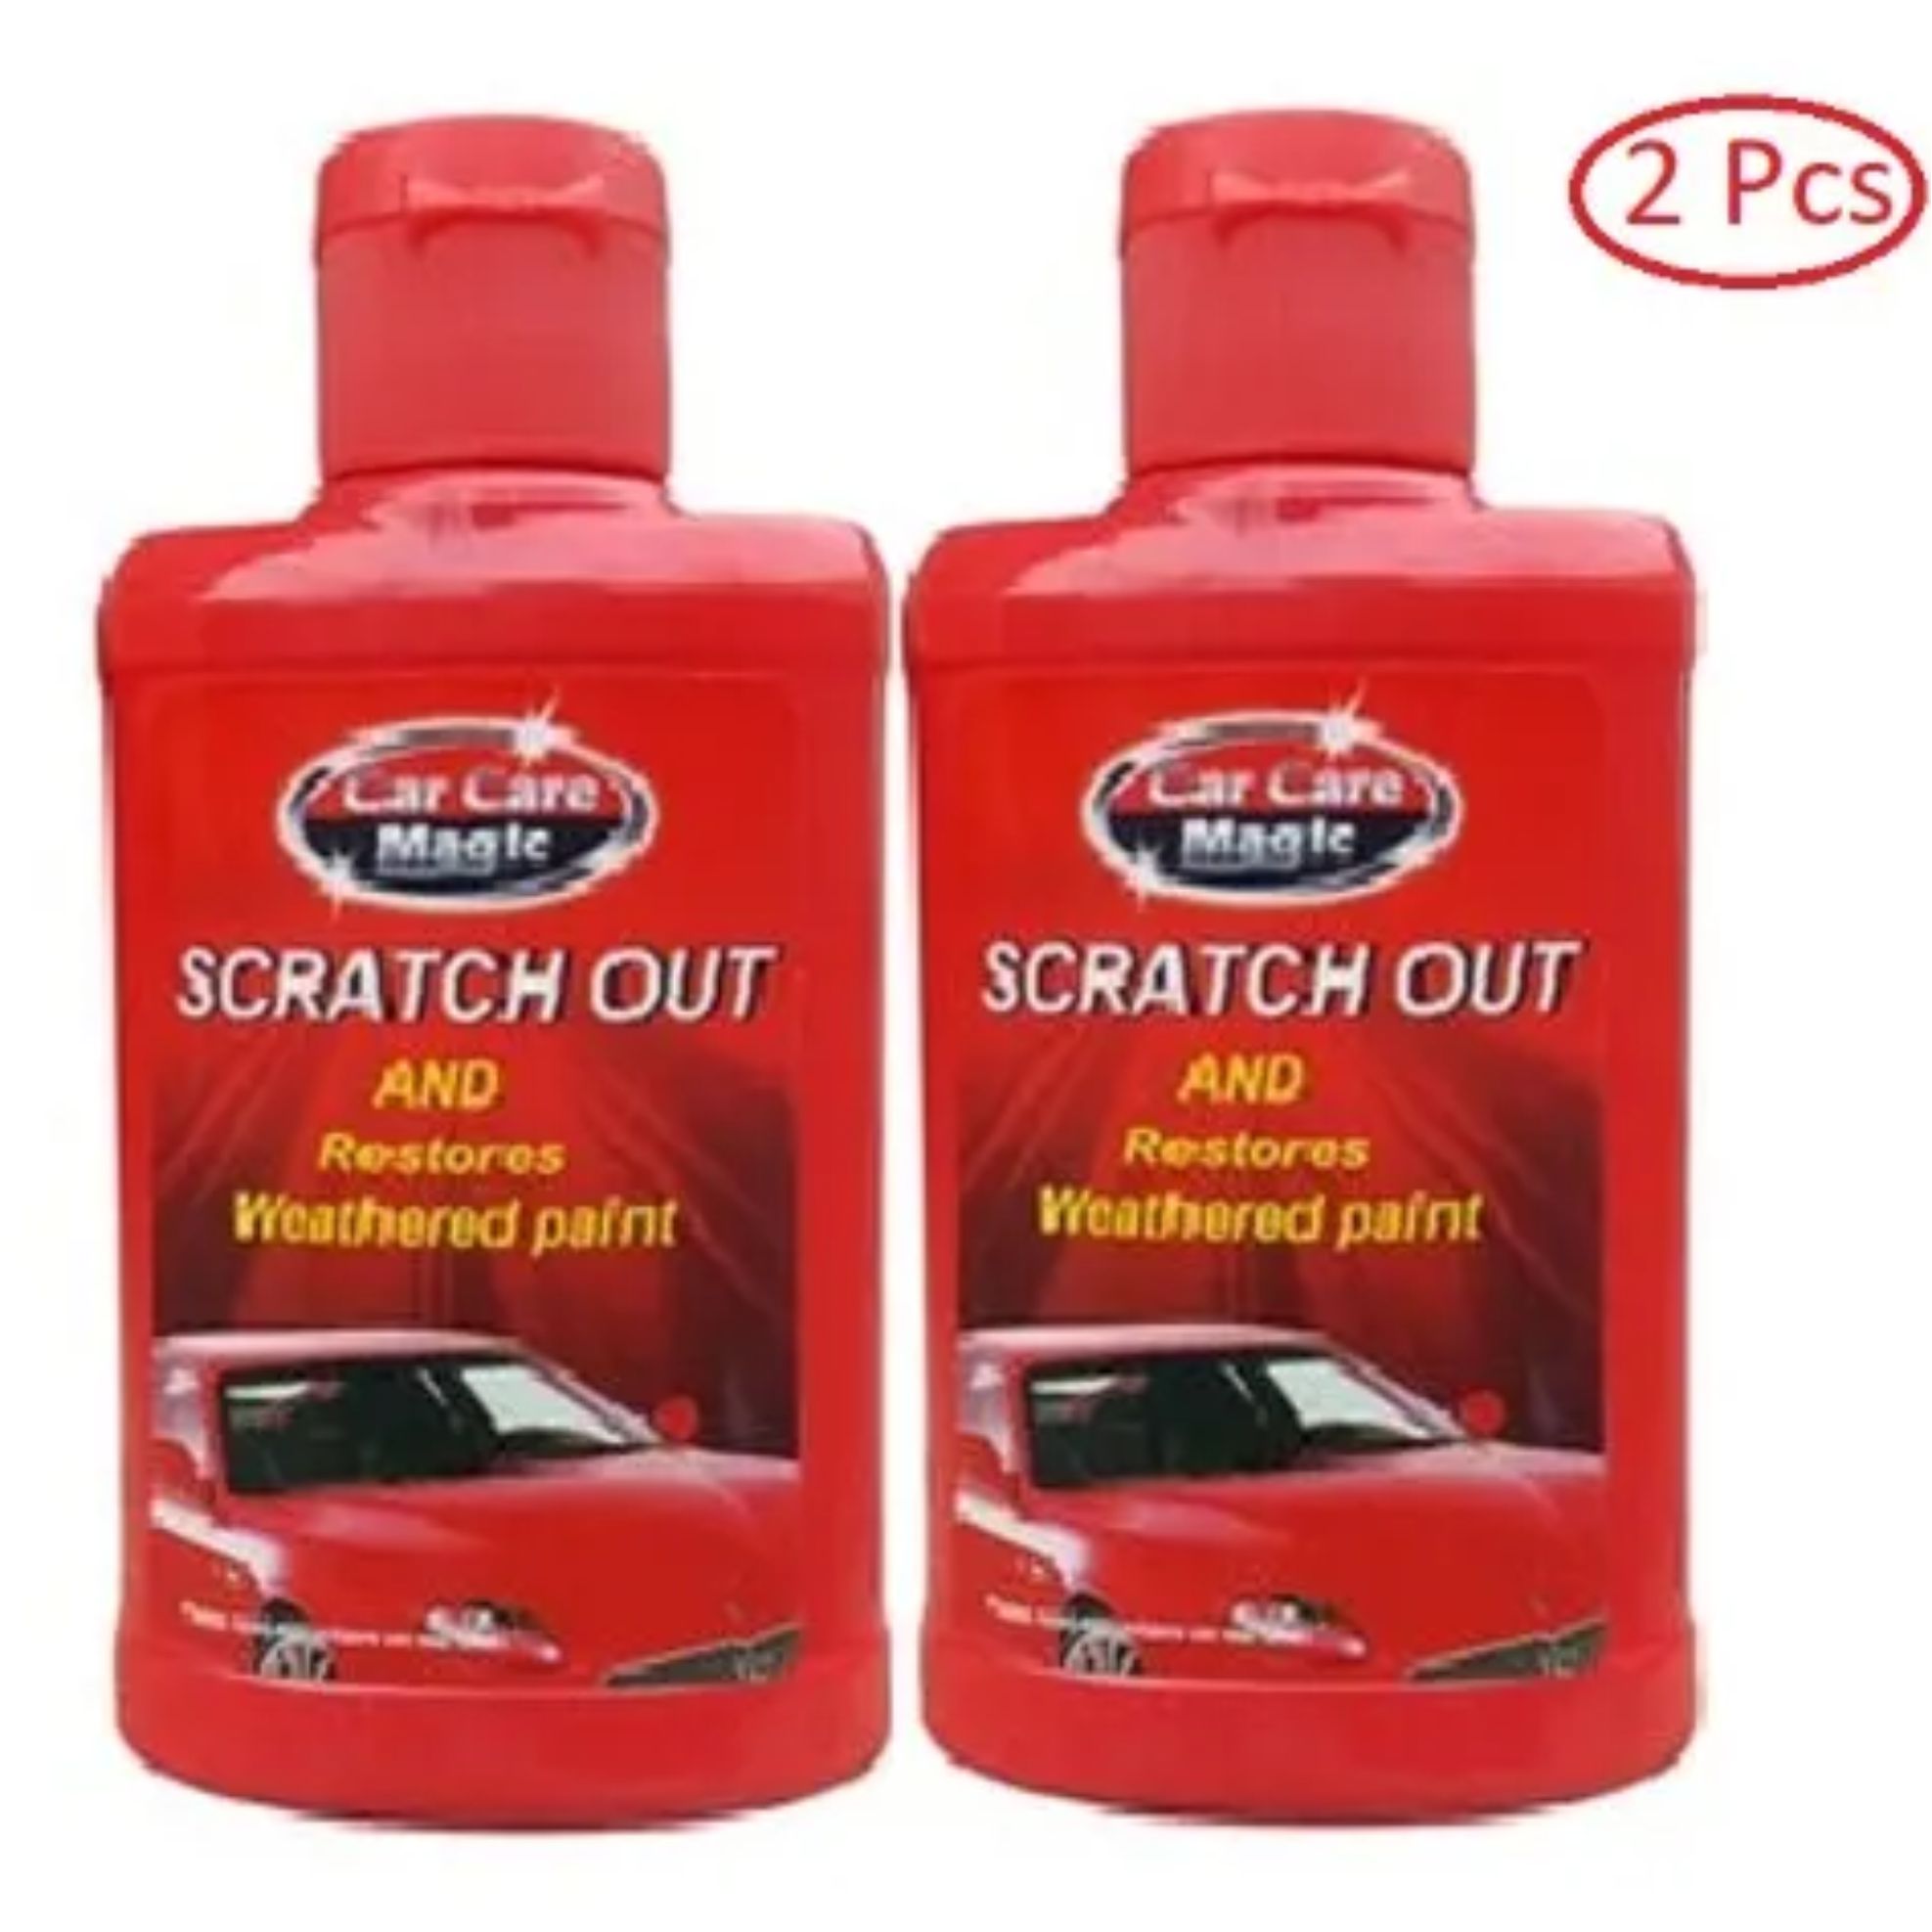 Car care scratch out removal (2 Pieces) 